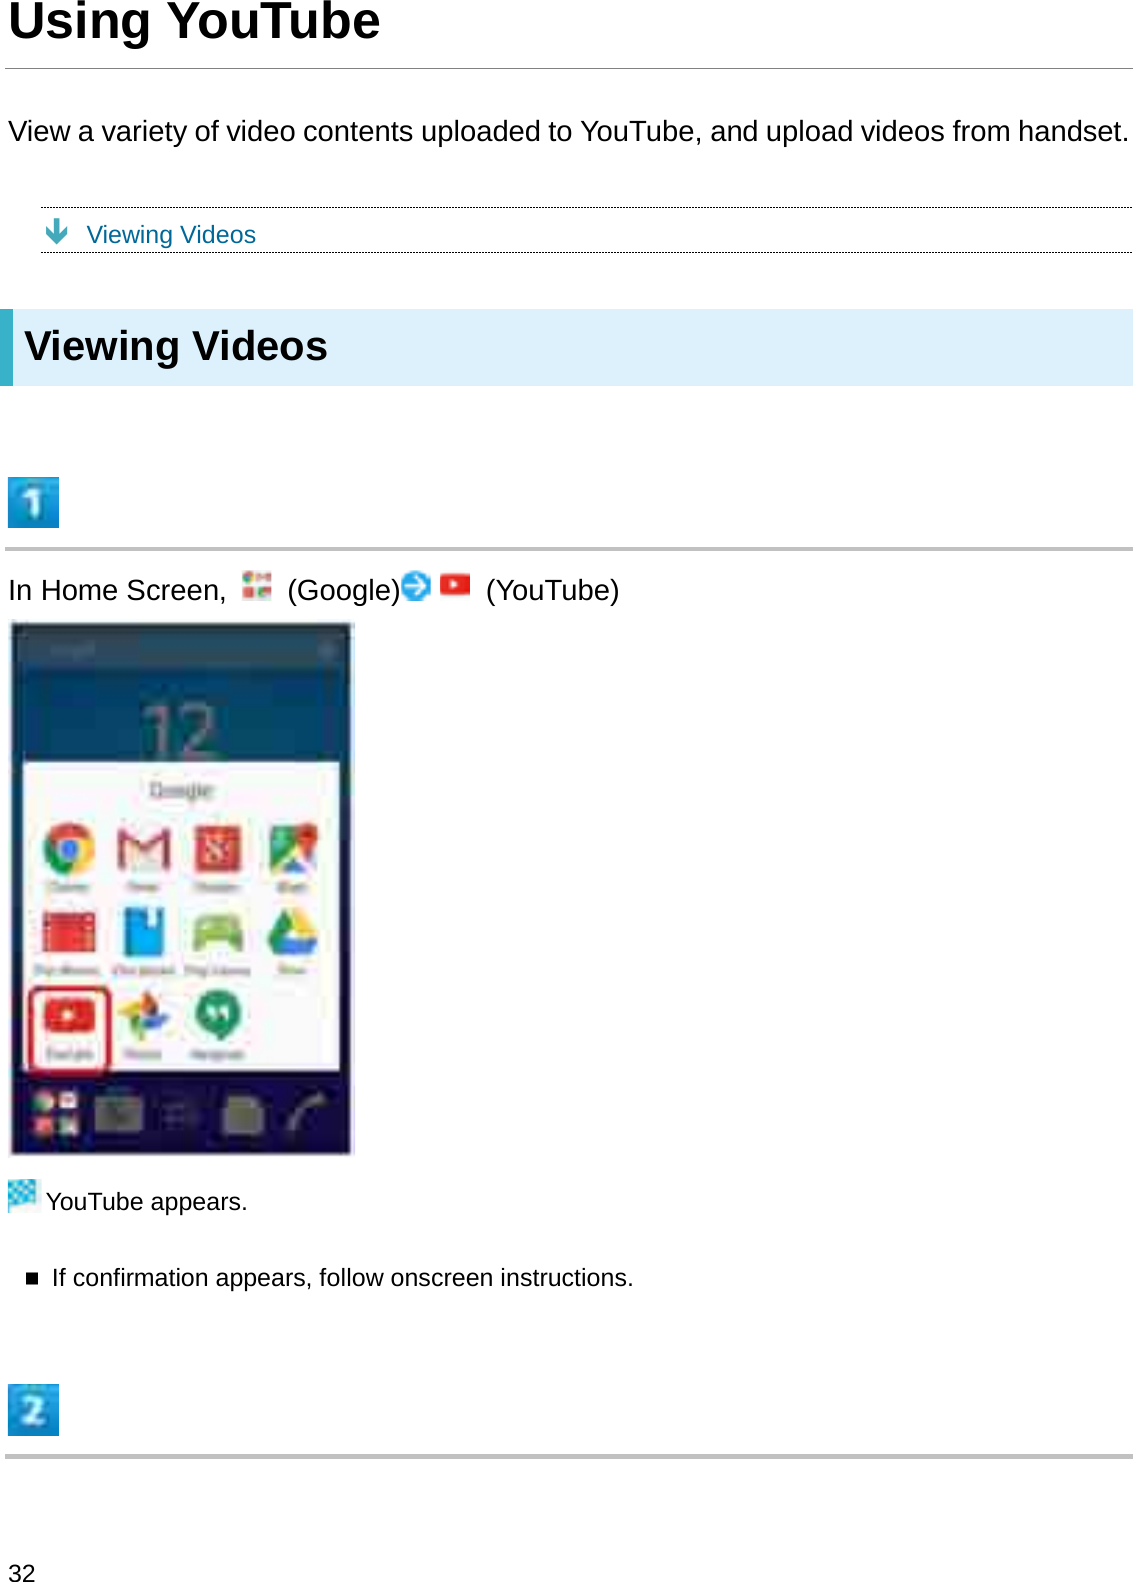 Using YouTubeView a variety of video contents uploaded to YouTube, and upload videos from handset.ÐViewing VideosViewing VideosIn Home Screen,  (Google) (YouTube)YouTube appears.If confirmation appears, follow onscreen instructions.32